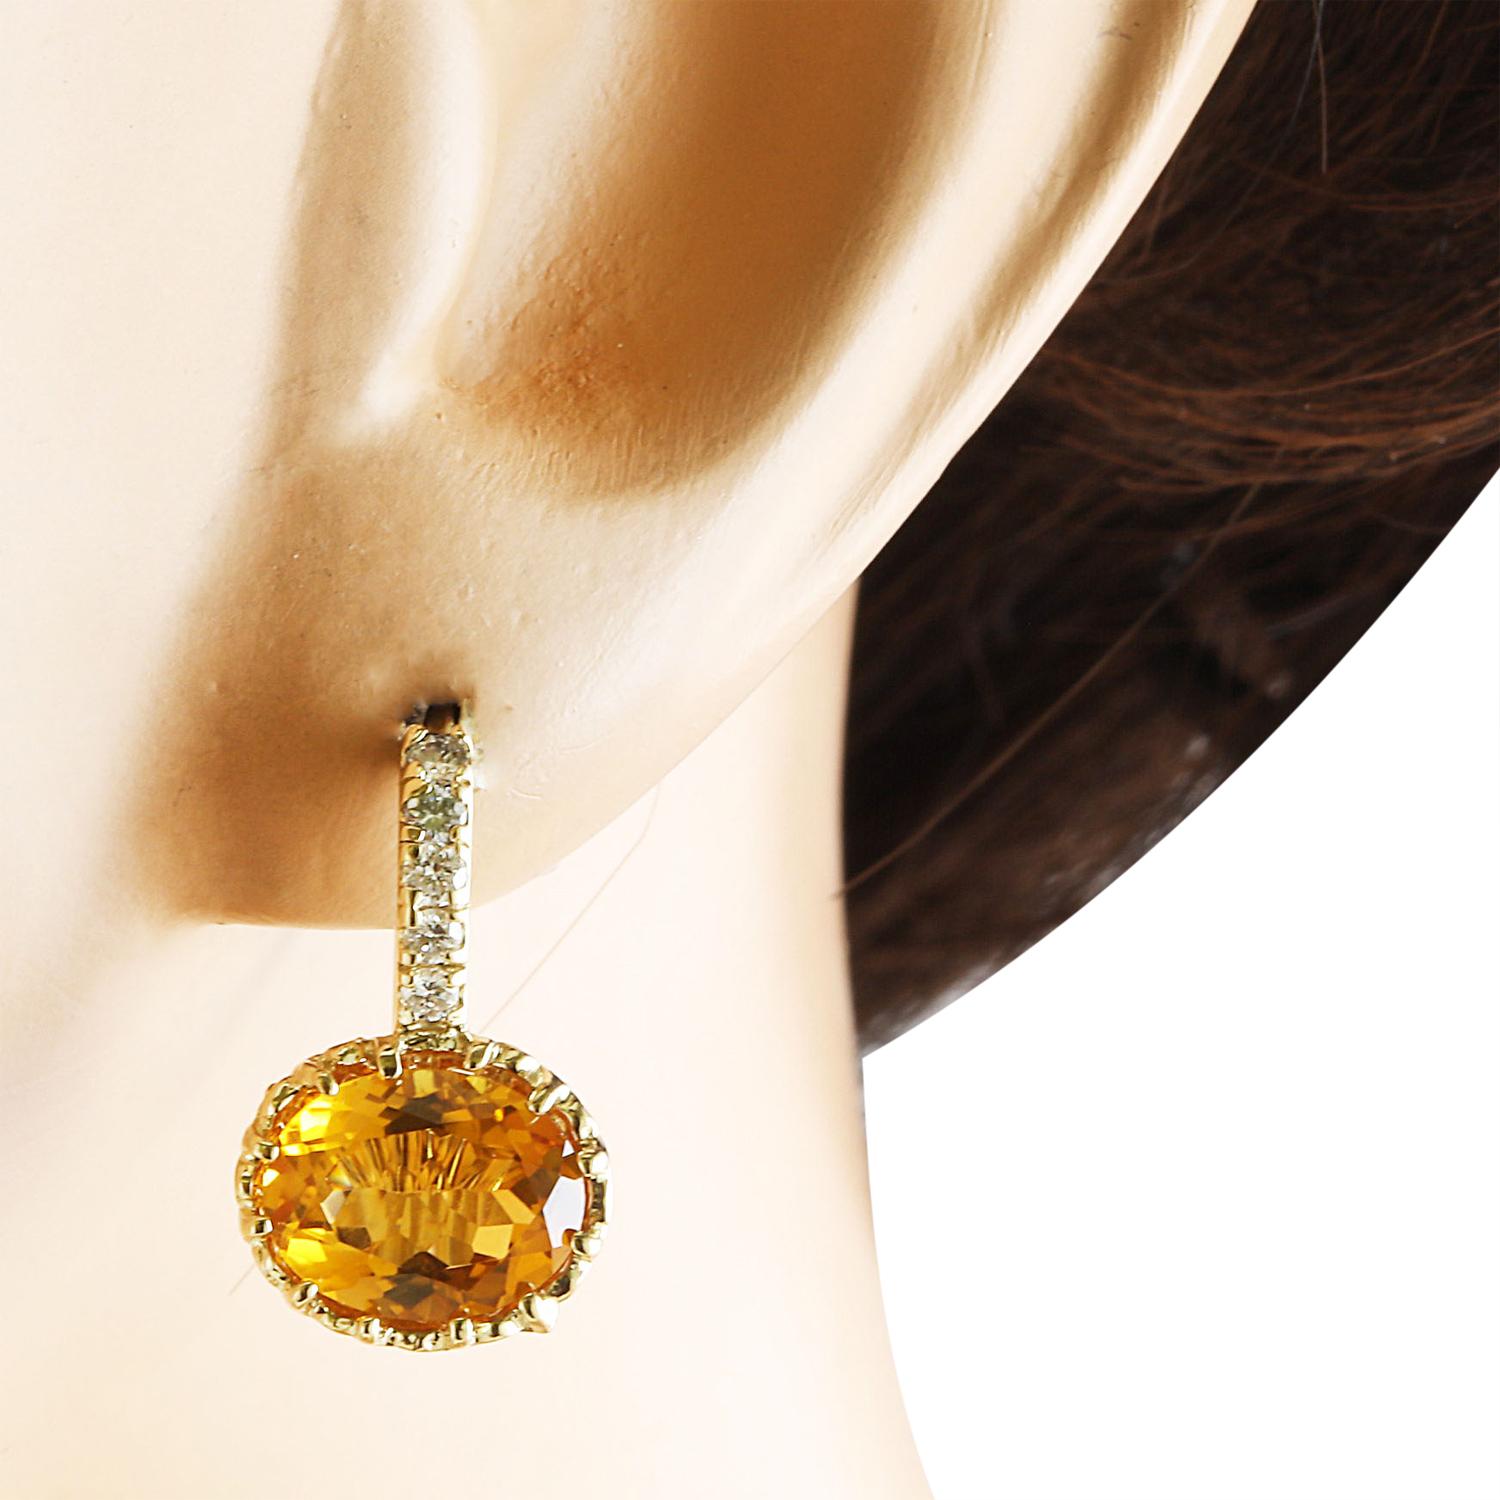 Oval Cut Dazzling Natural Citrine Diamond Earrings in 14K Solid Yellow Gold For Sale